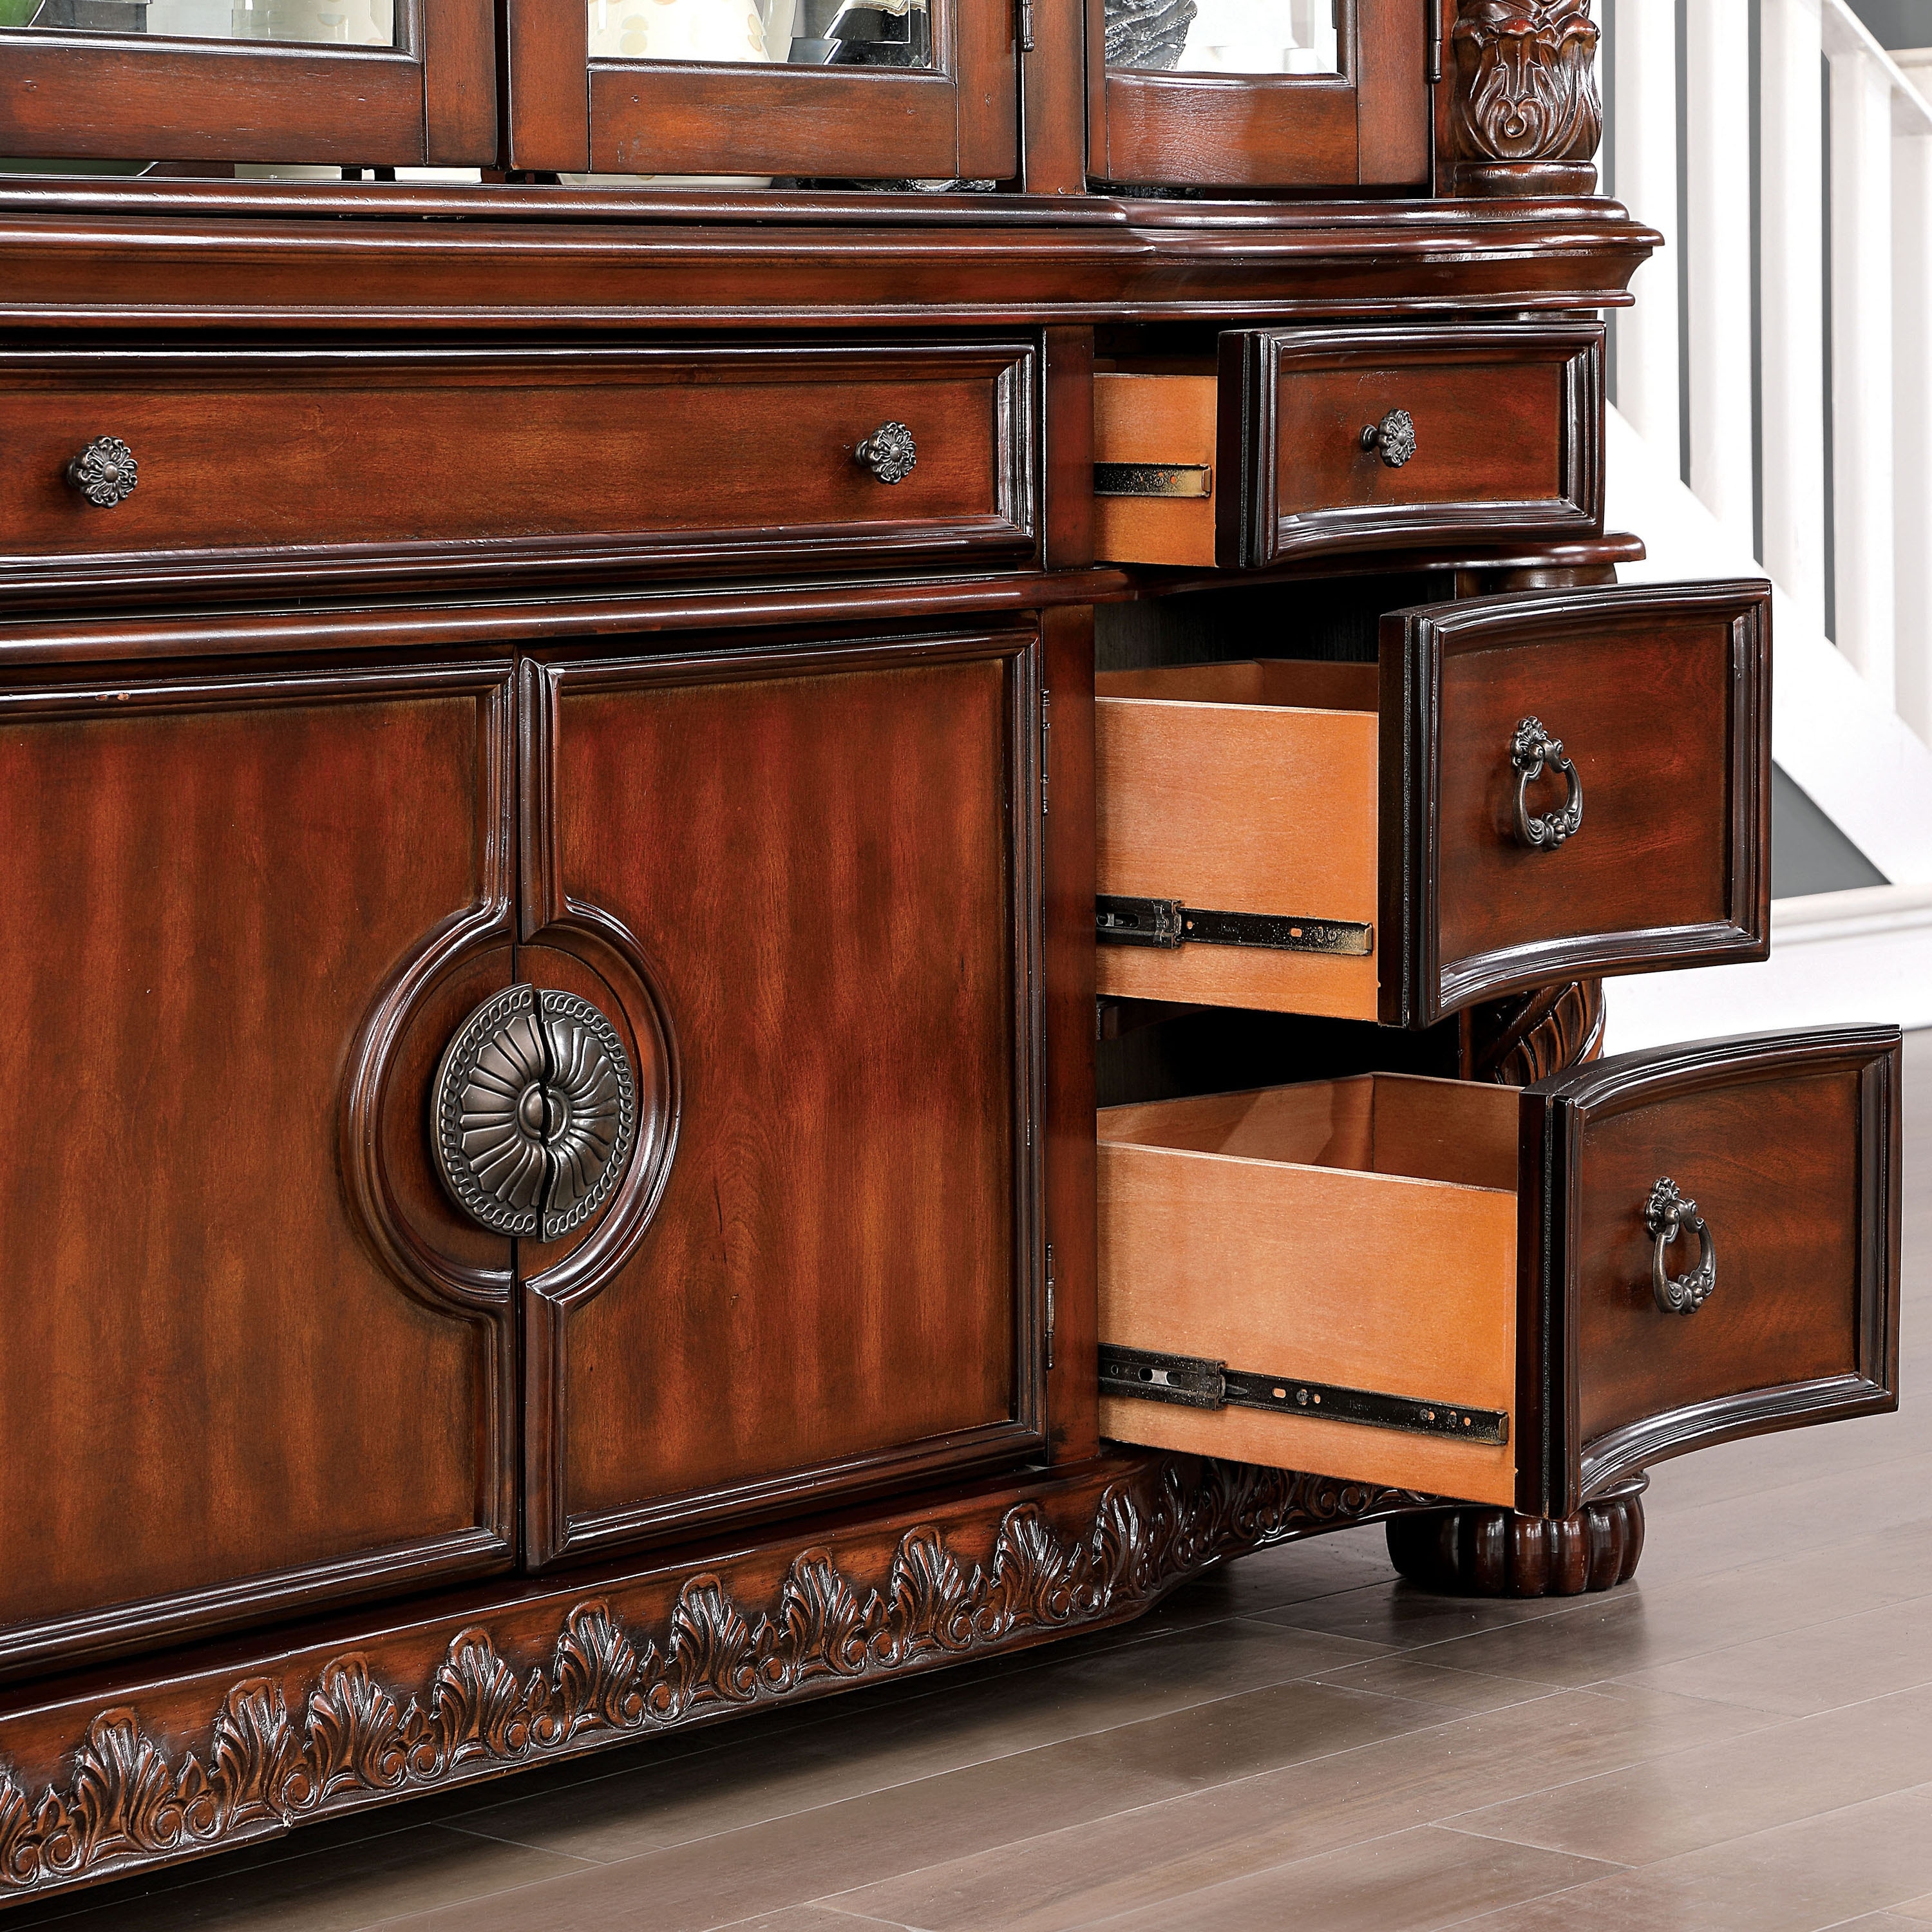 Furniture of America Abeena Traditional Brown Cherry 7-drawer Hutch and Buffet